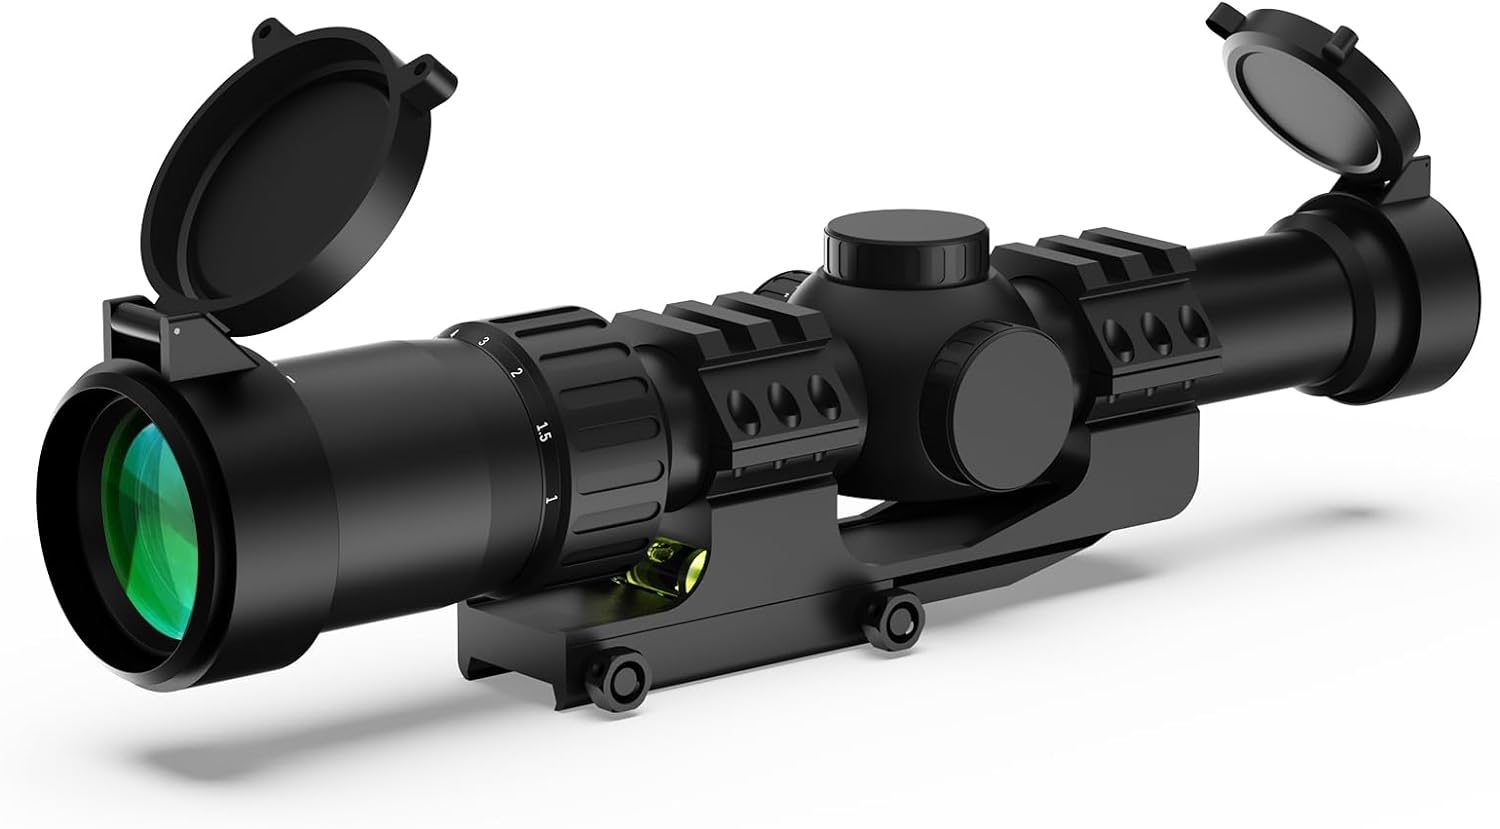 FHYRGF 1-8x24 Rifle Scope Review